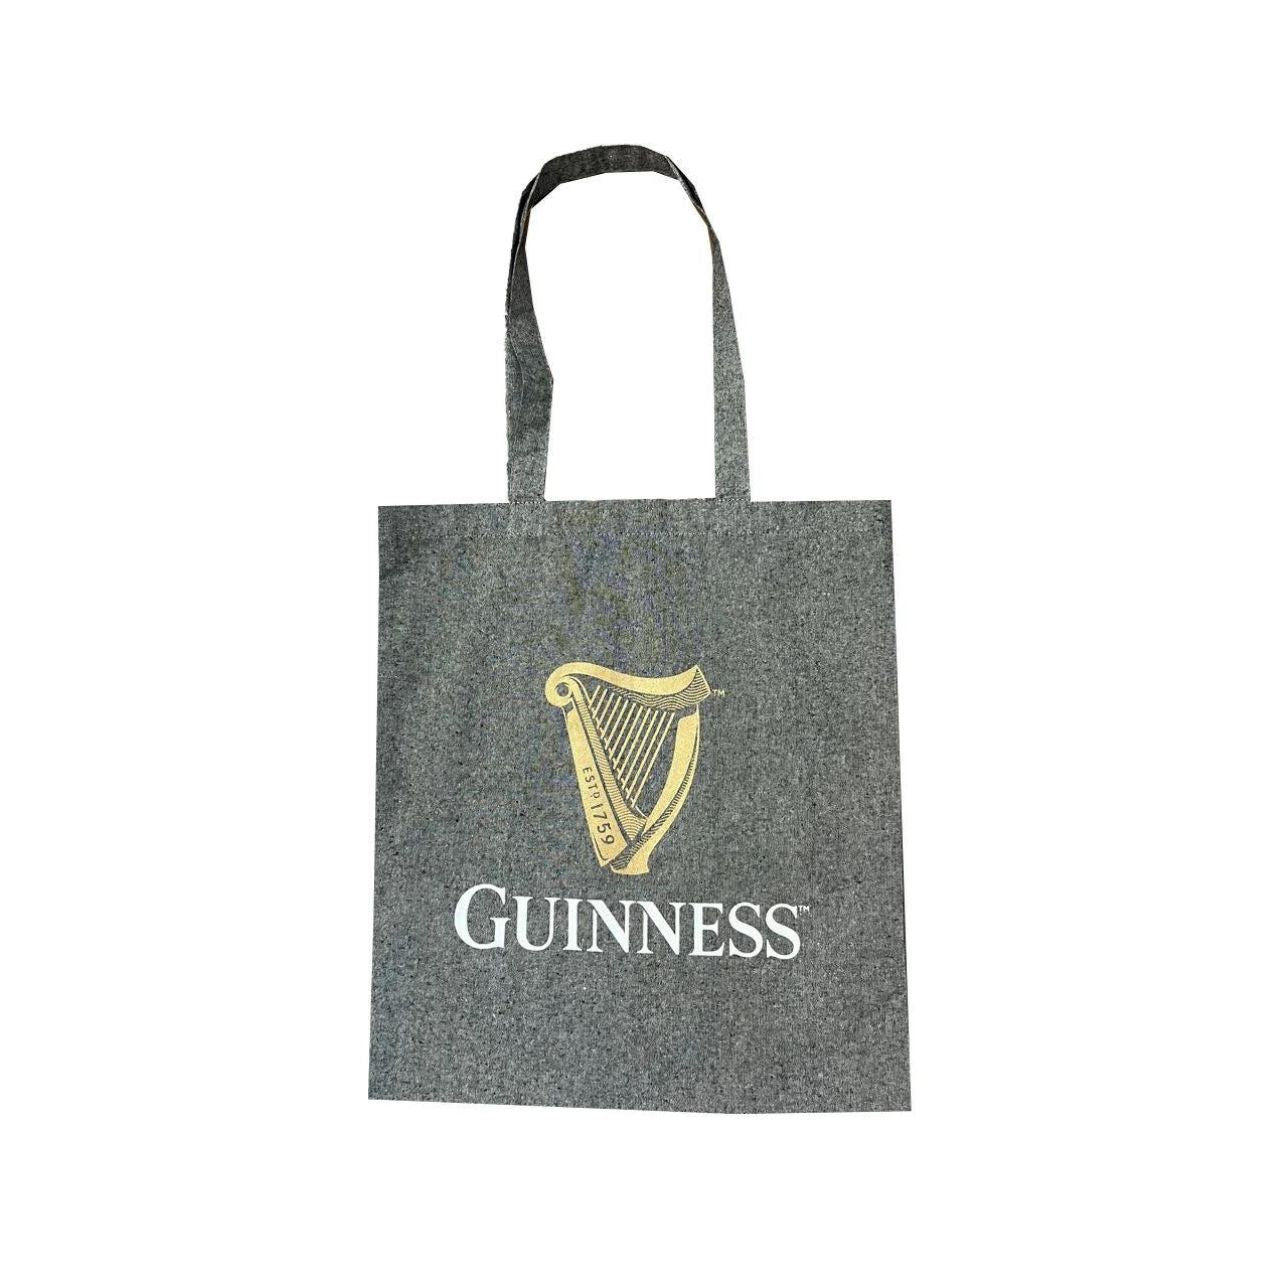 The stylish cotton Guinness Harp tote bag is made for those who love to run their errands or carry their books in style! This is the perfect accessory for fans of Guinness or for gifting to a friend who needs a new tote.